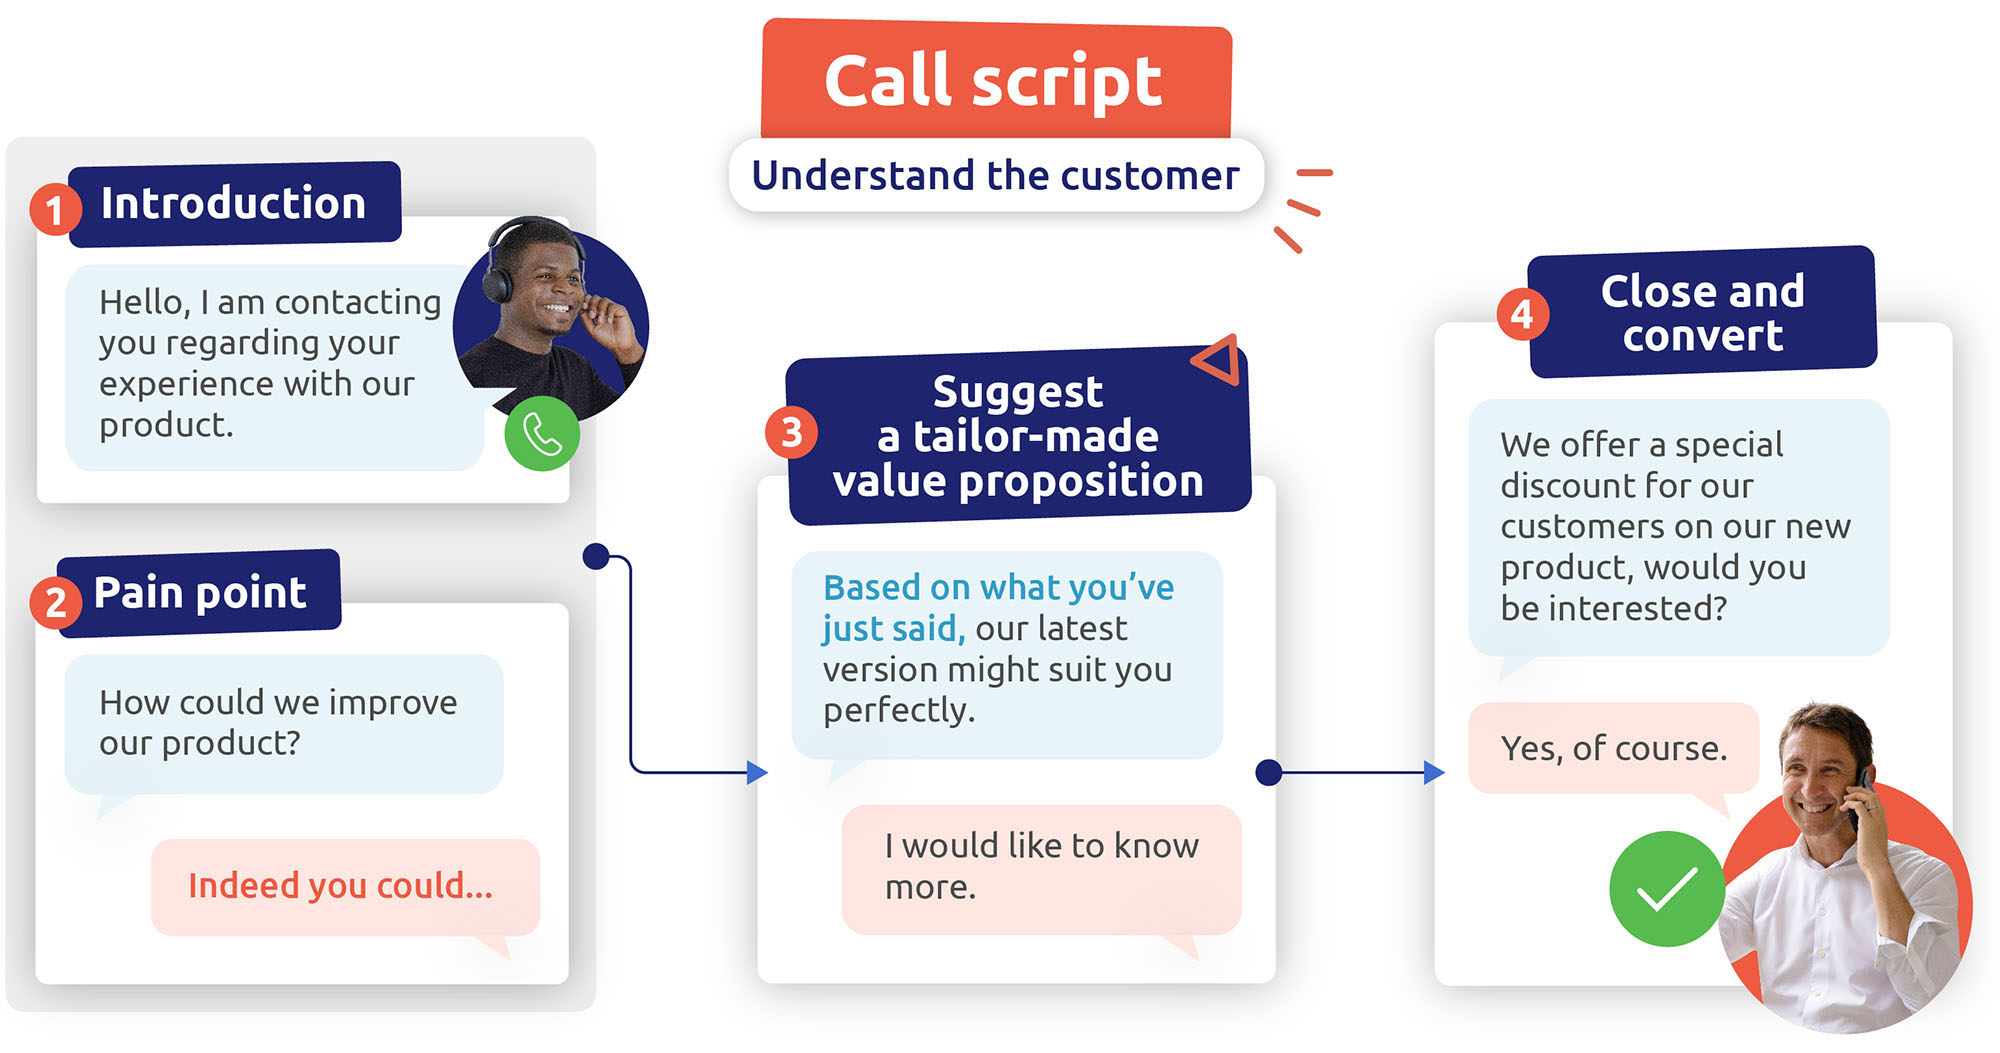 Example of a call script that understands the customer and suggests the right offer